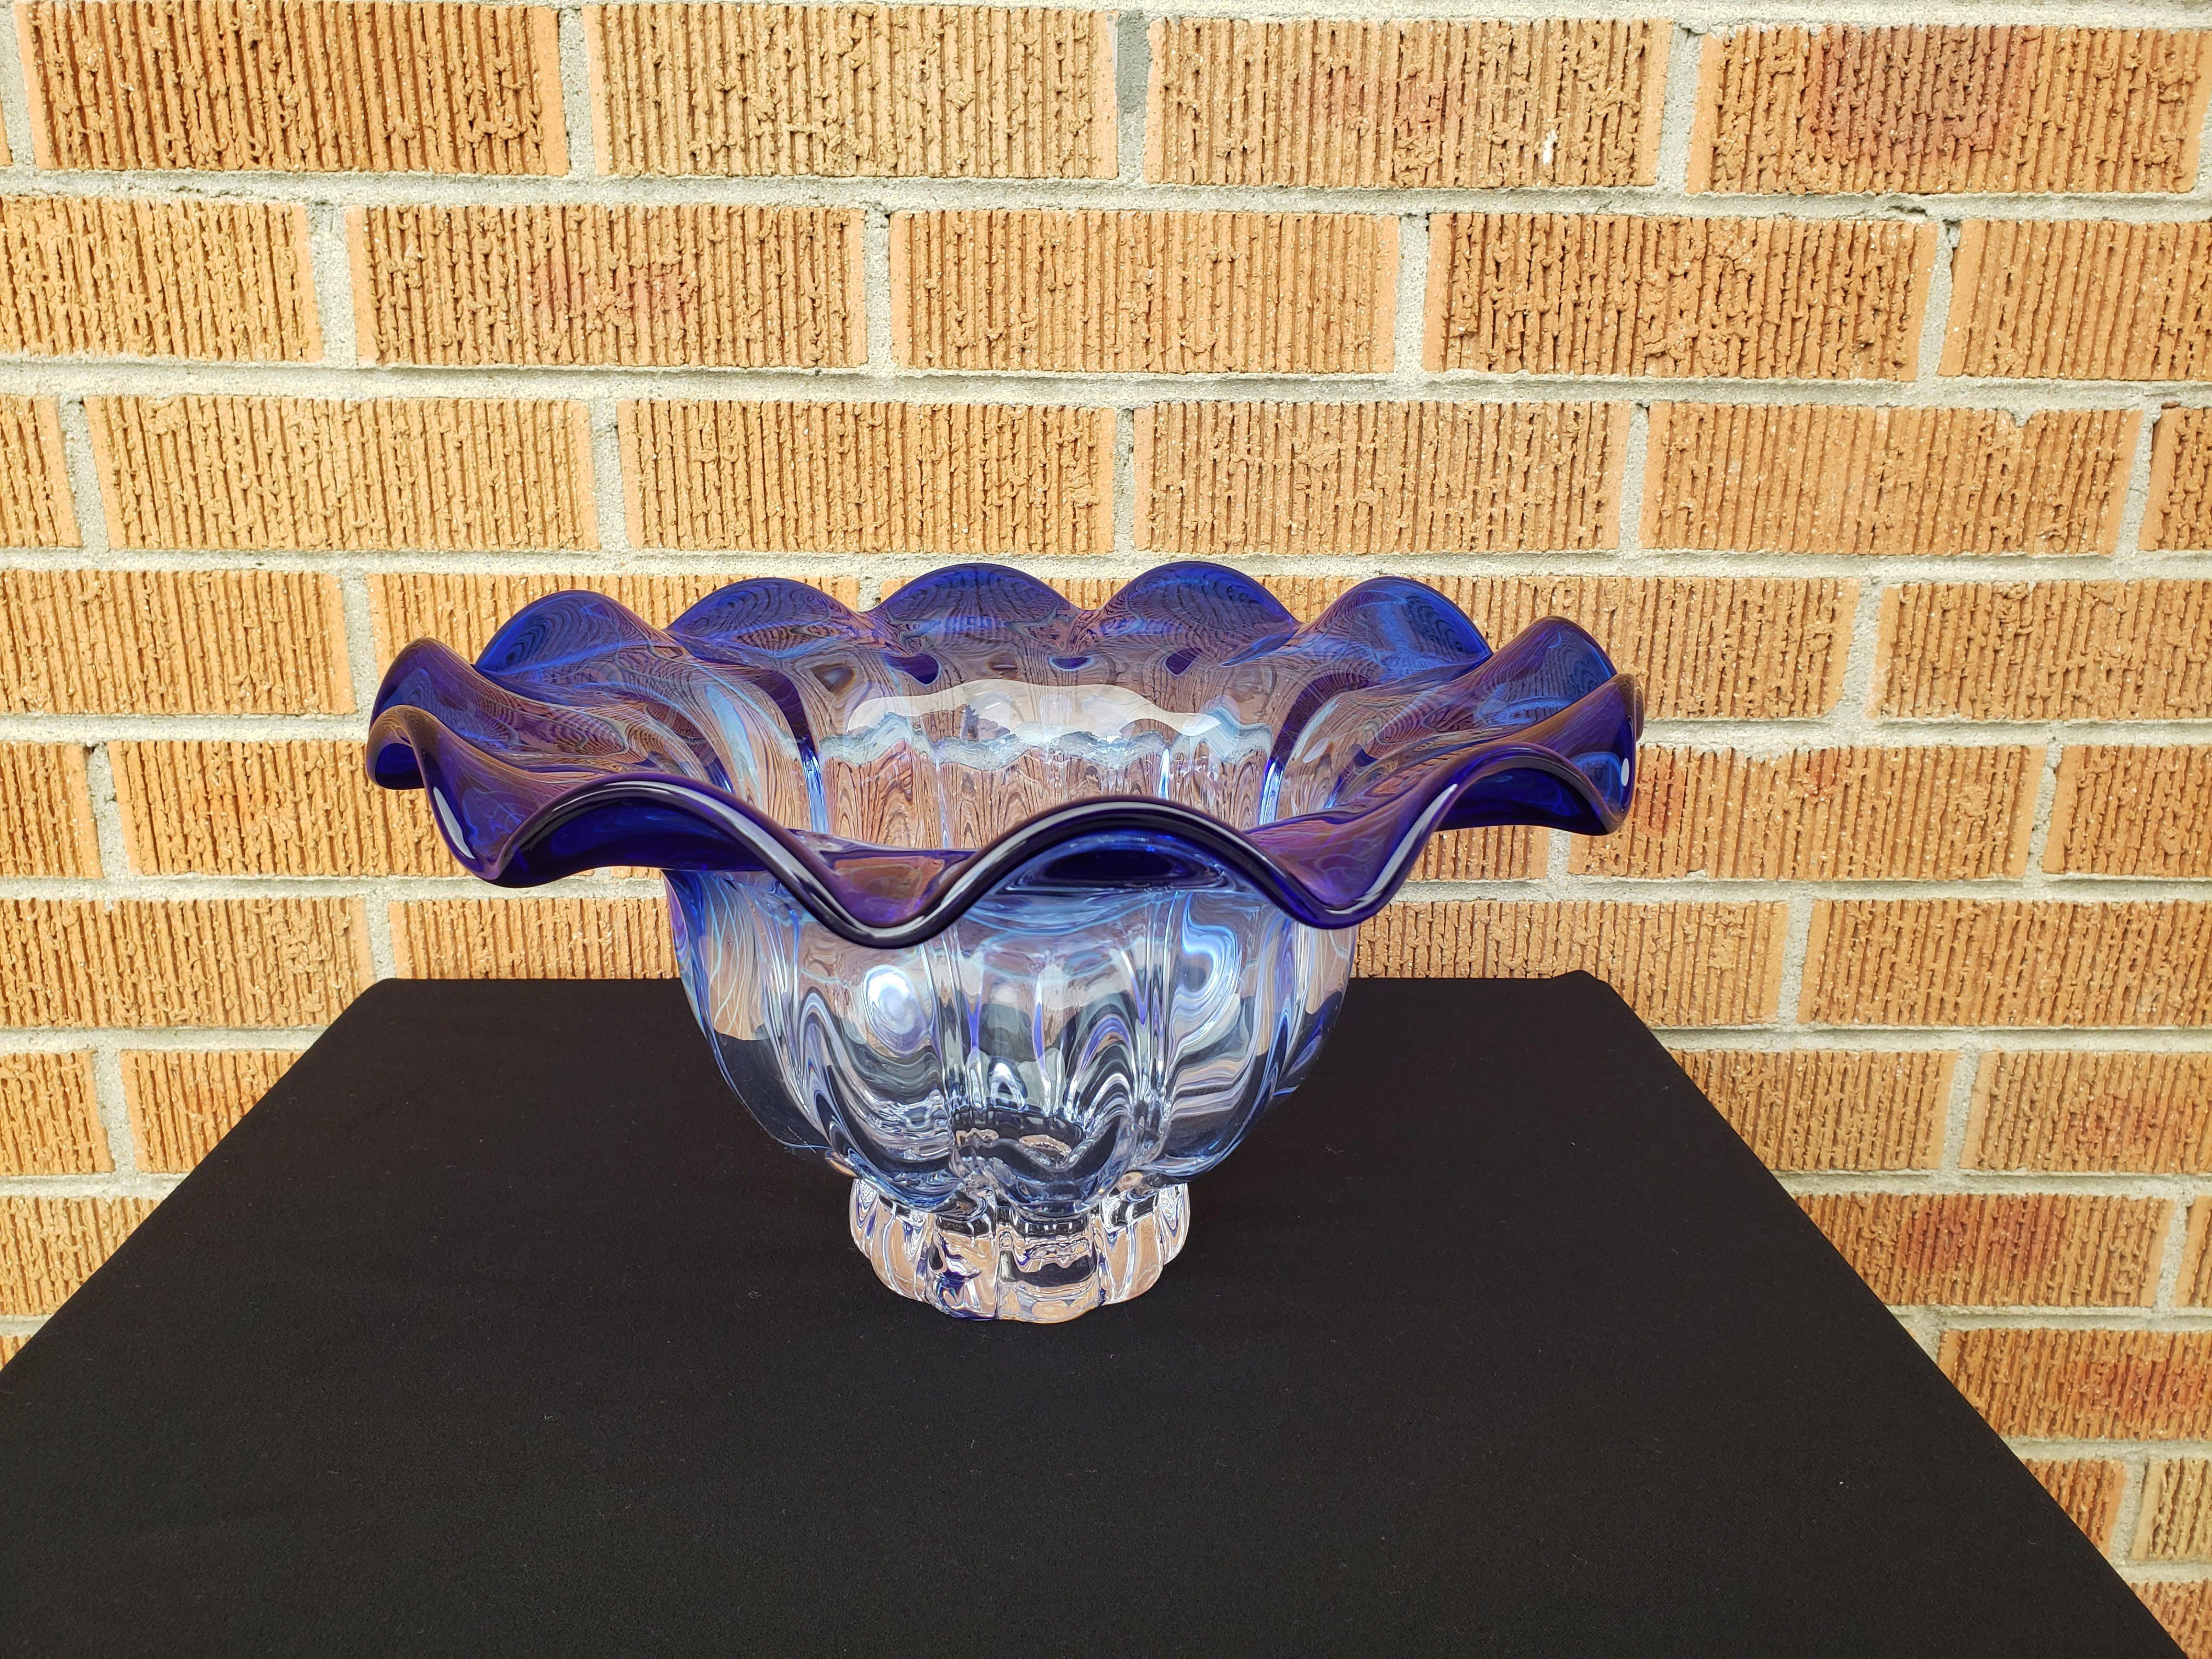 Large Mid-Century Modern cobalt blue swirl bowl. This would make a beautiful centerpiece for a coffee table or a mantle.